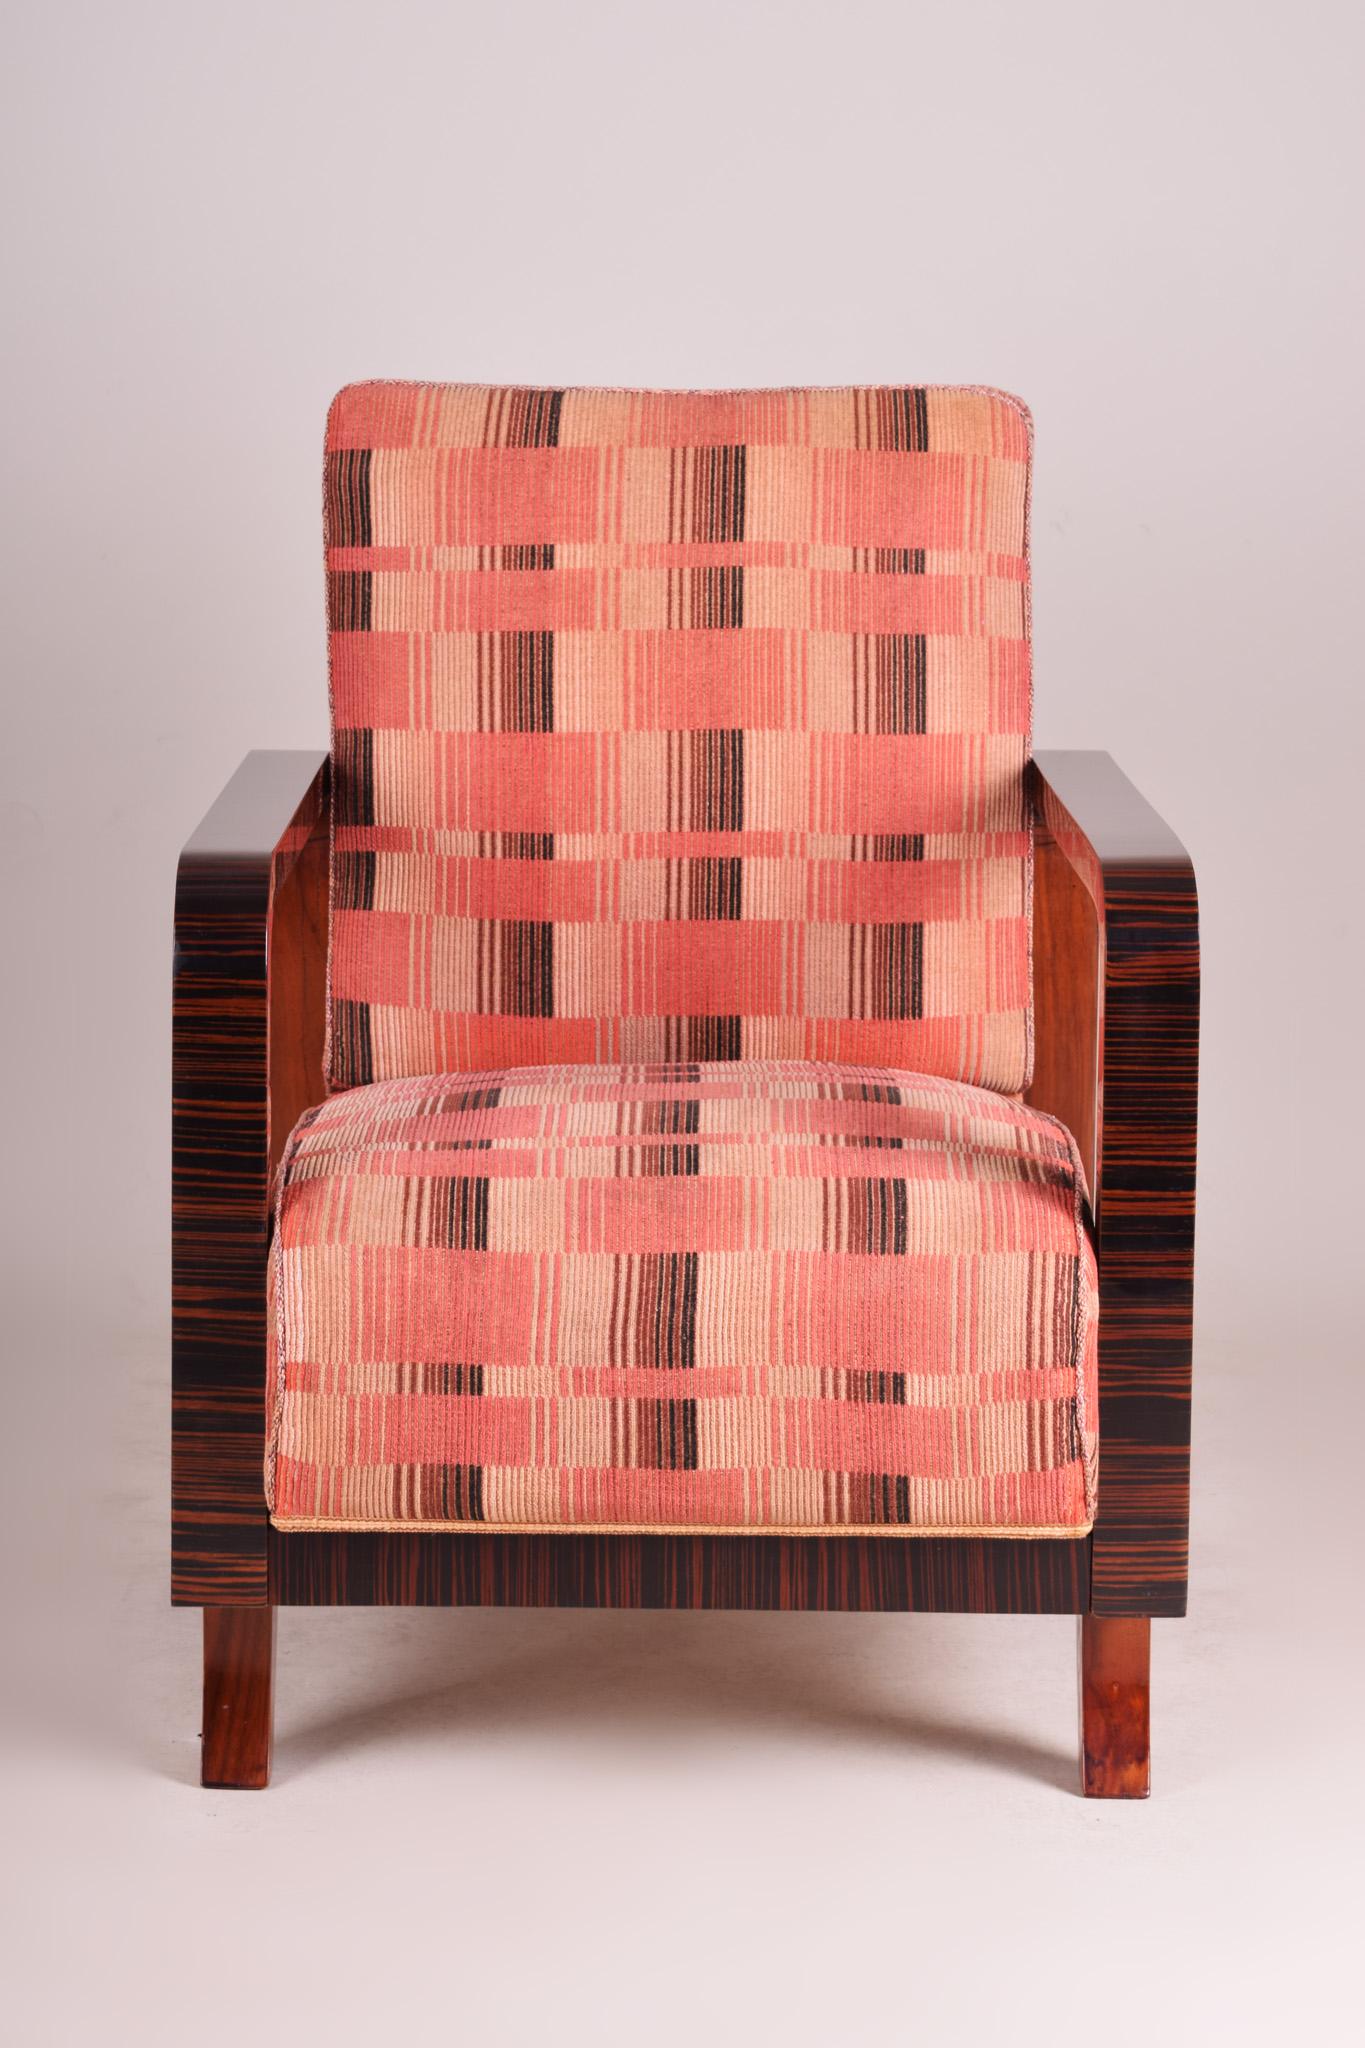 Pink Art Deco Armchair, Made in 1930s Czechia and Restored, Original Fabric For Sale 8